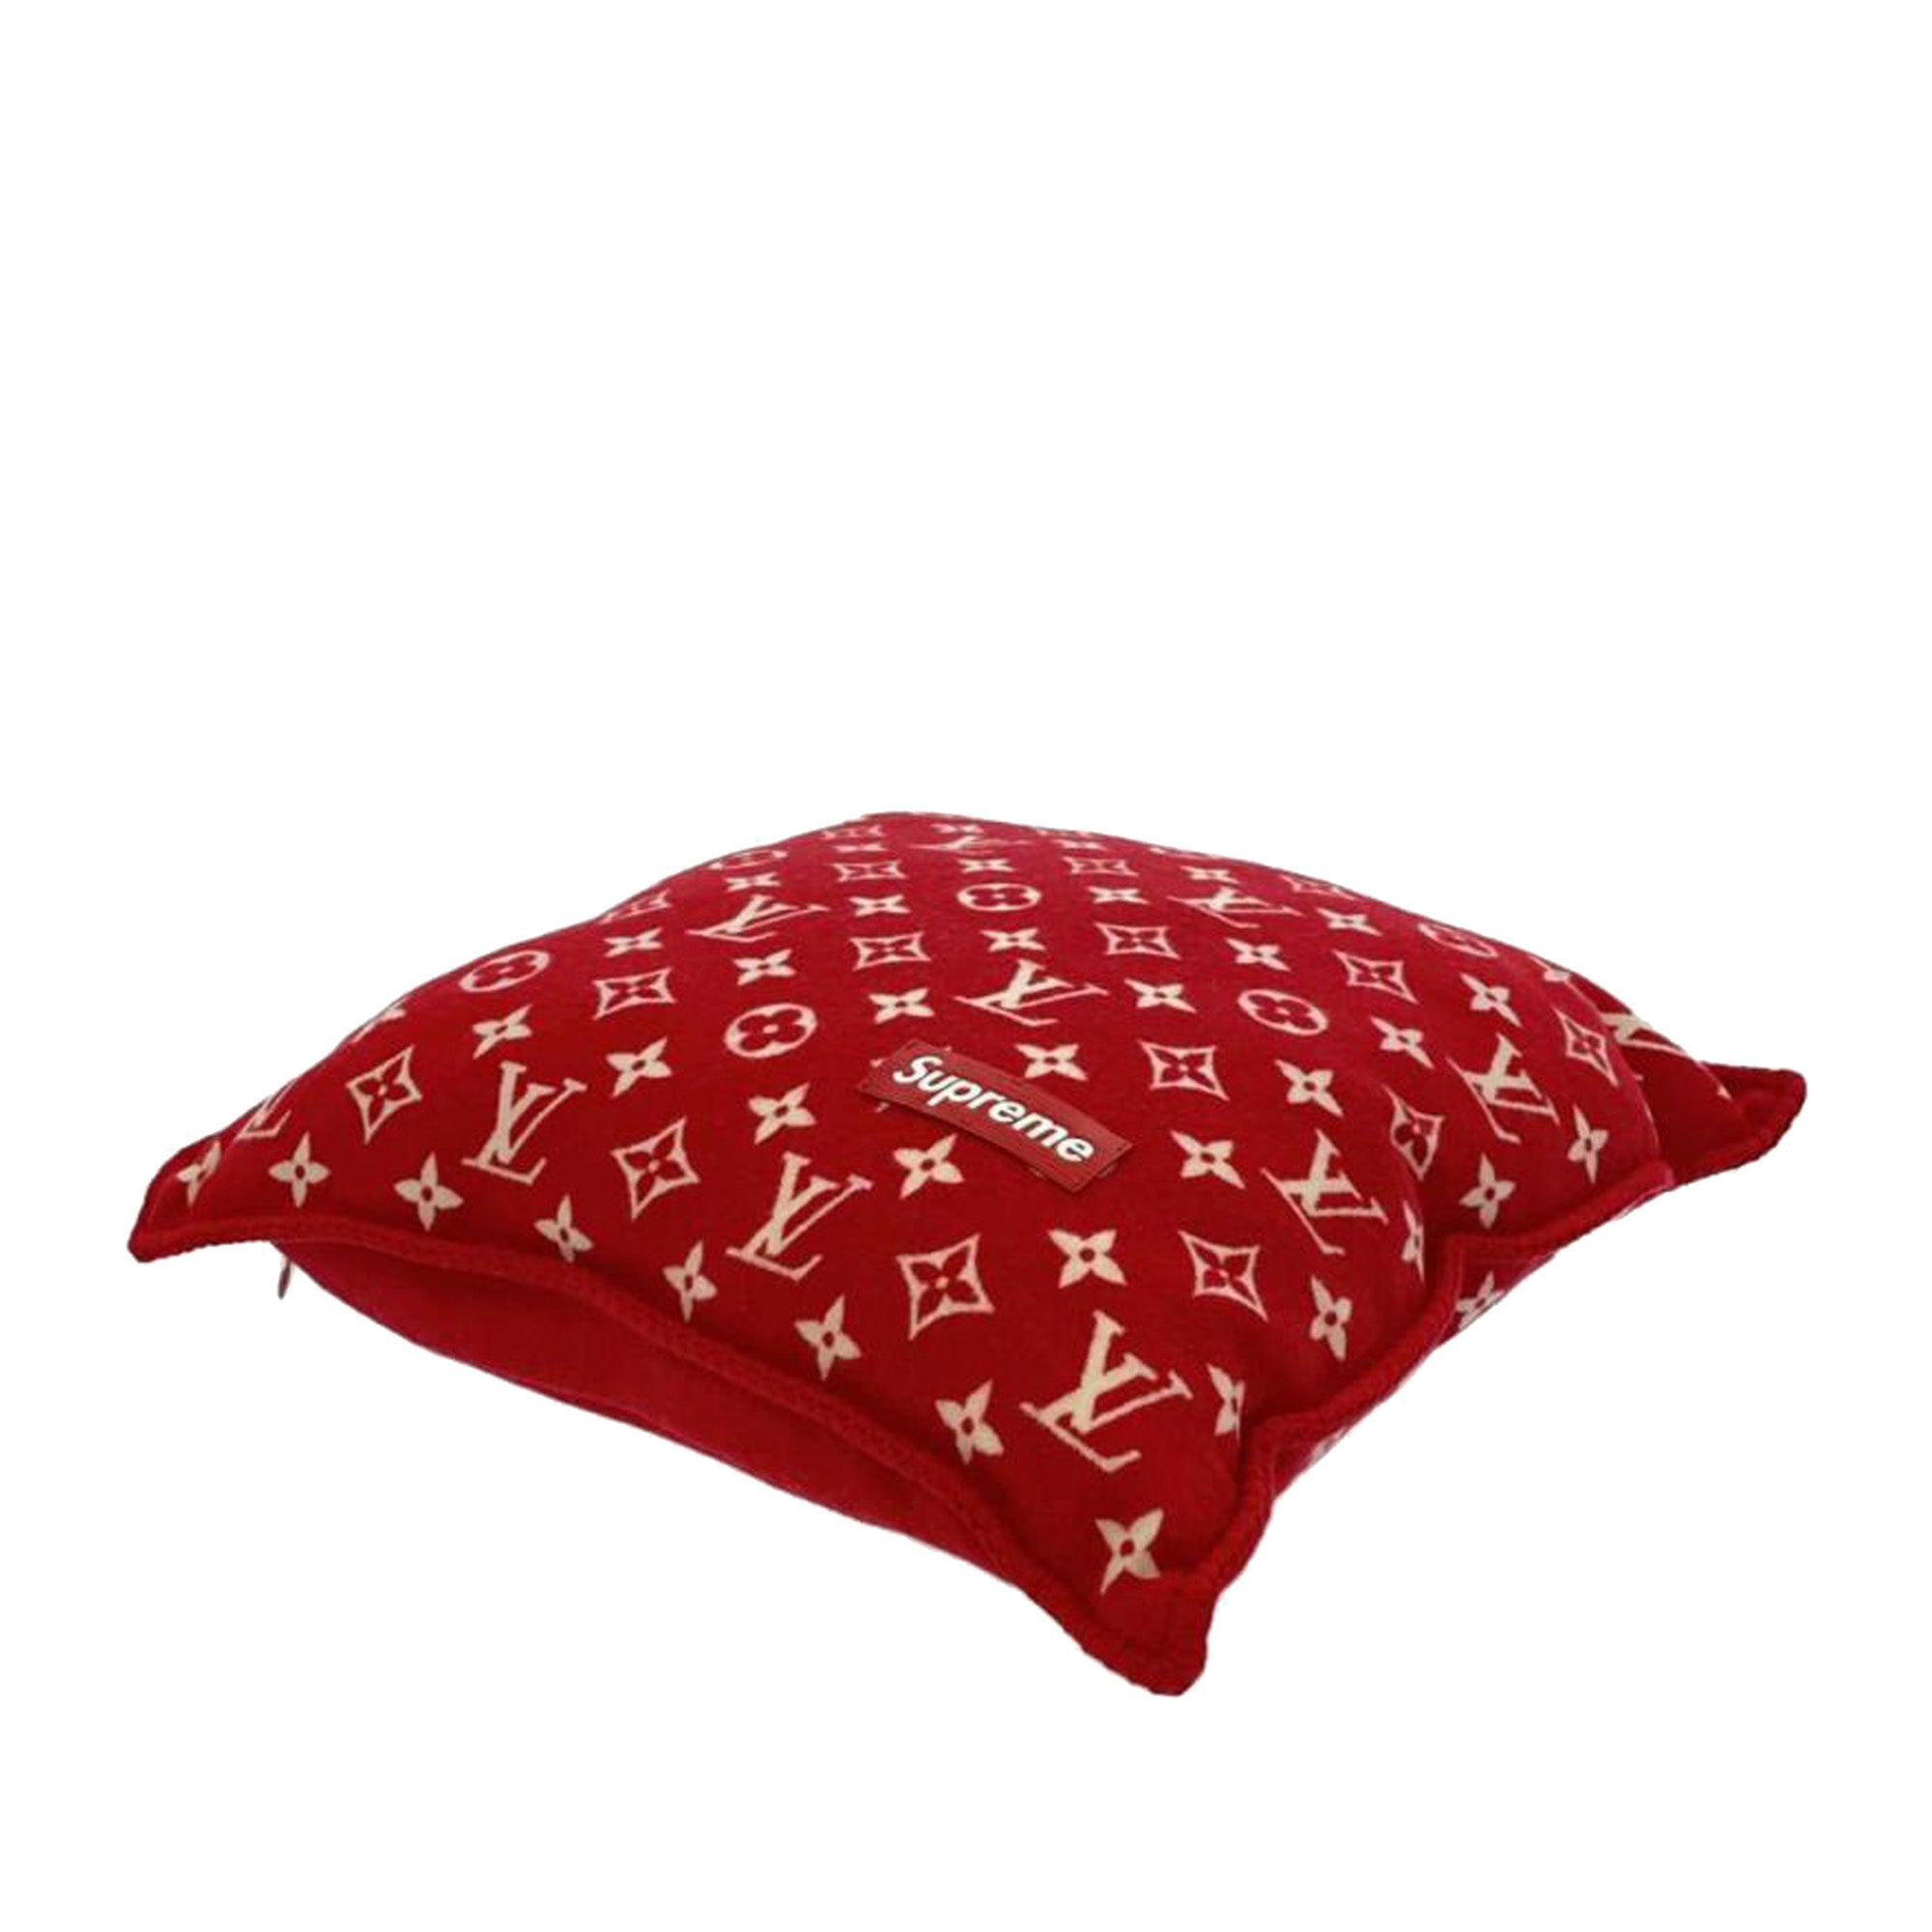 Louis Vuitton X Supreme Monogram Pillow Available For Immediate